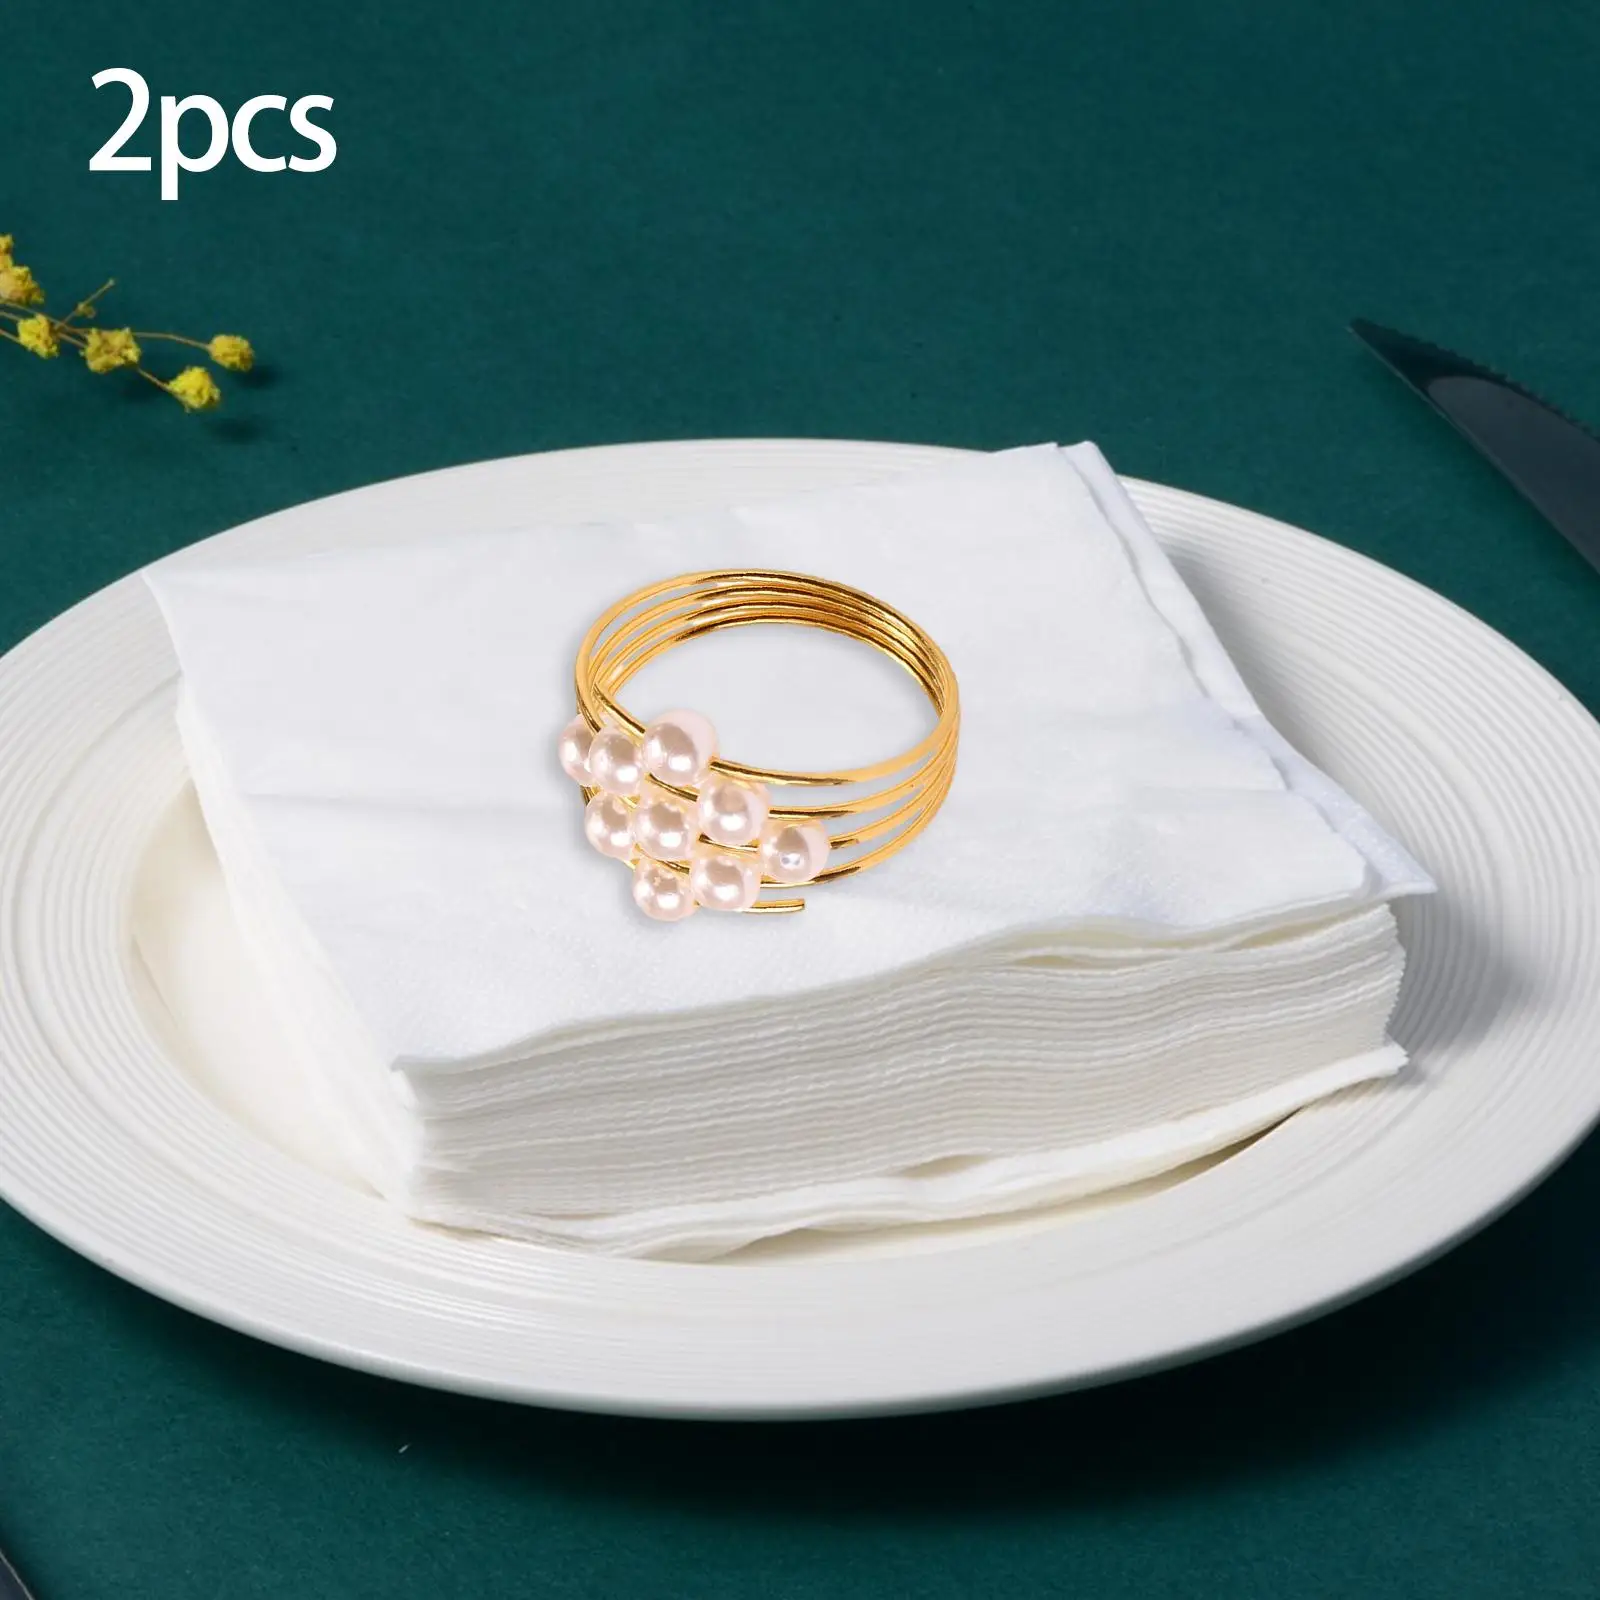 2Pcs Napkin Rings Napkin Buckles Pearls for Anniversary Home Decoration